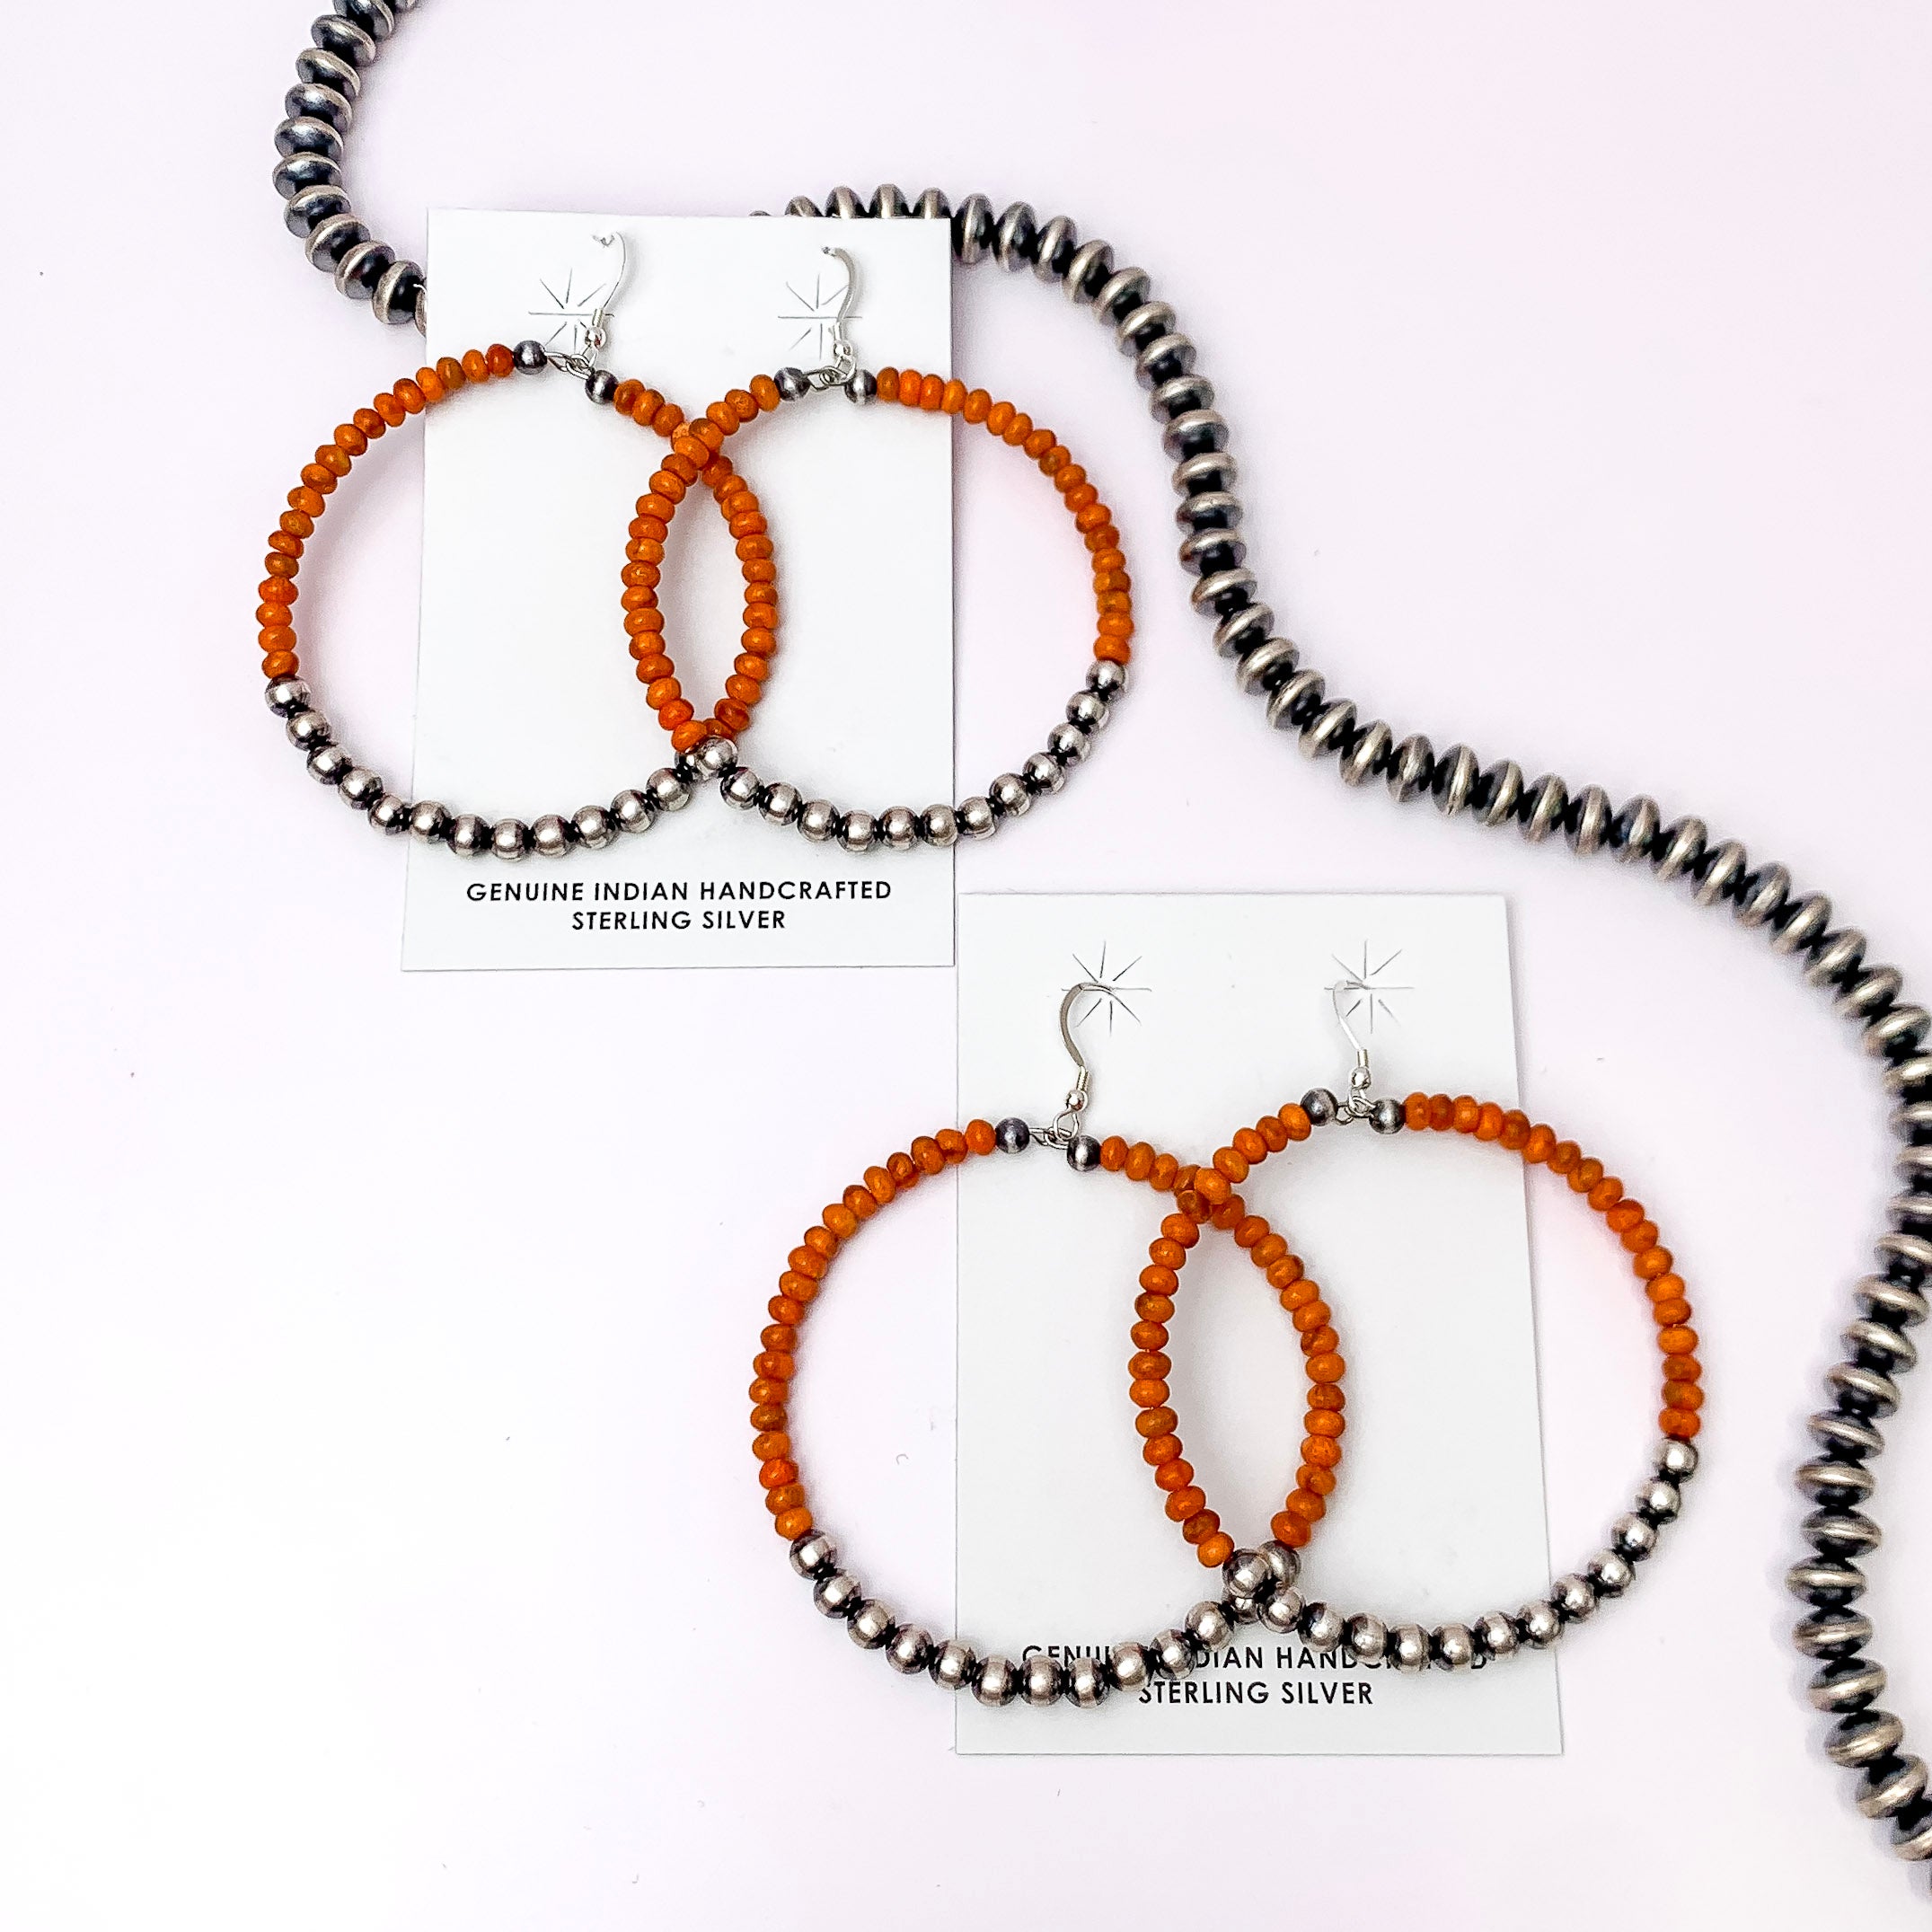 Centered in the picture is orange navajo beaded earrings on a white background. 